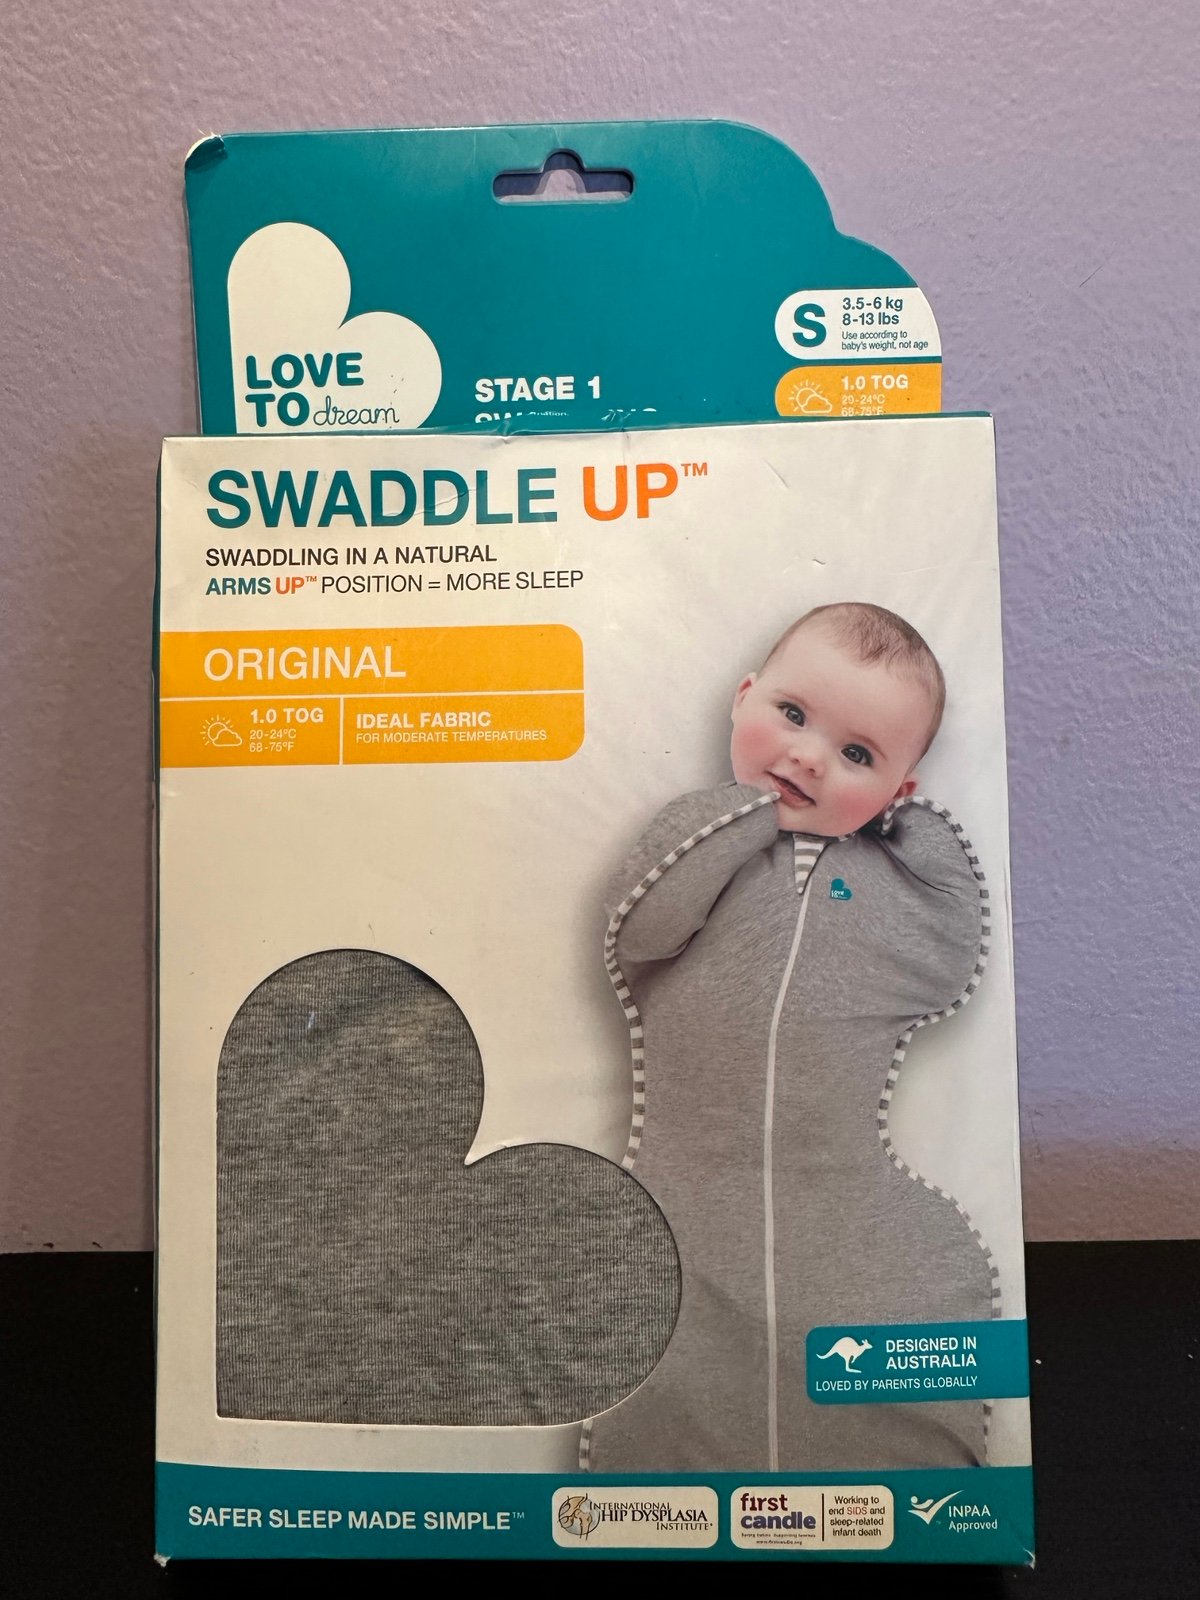 Love To Dream Swaddle UP Original Swaddle Small new EHh